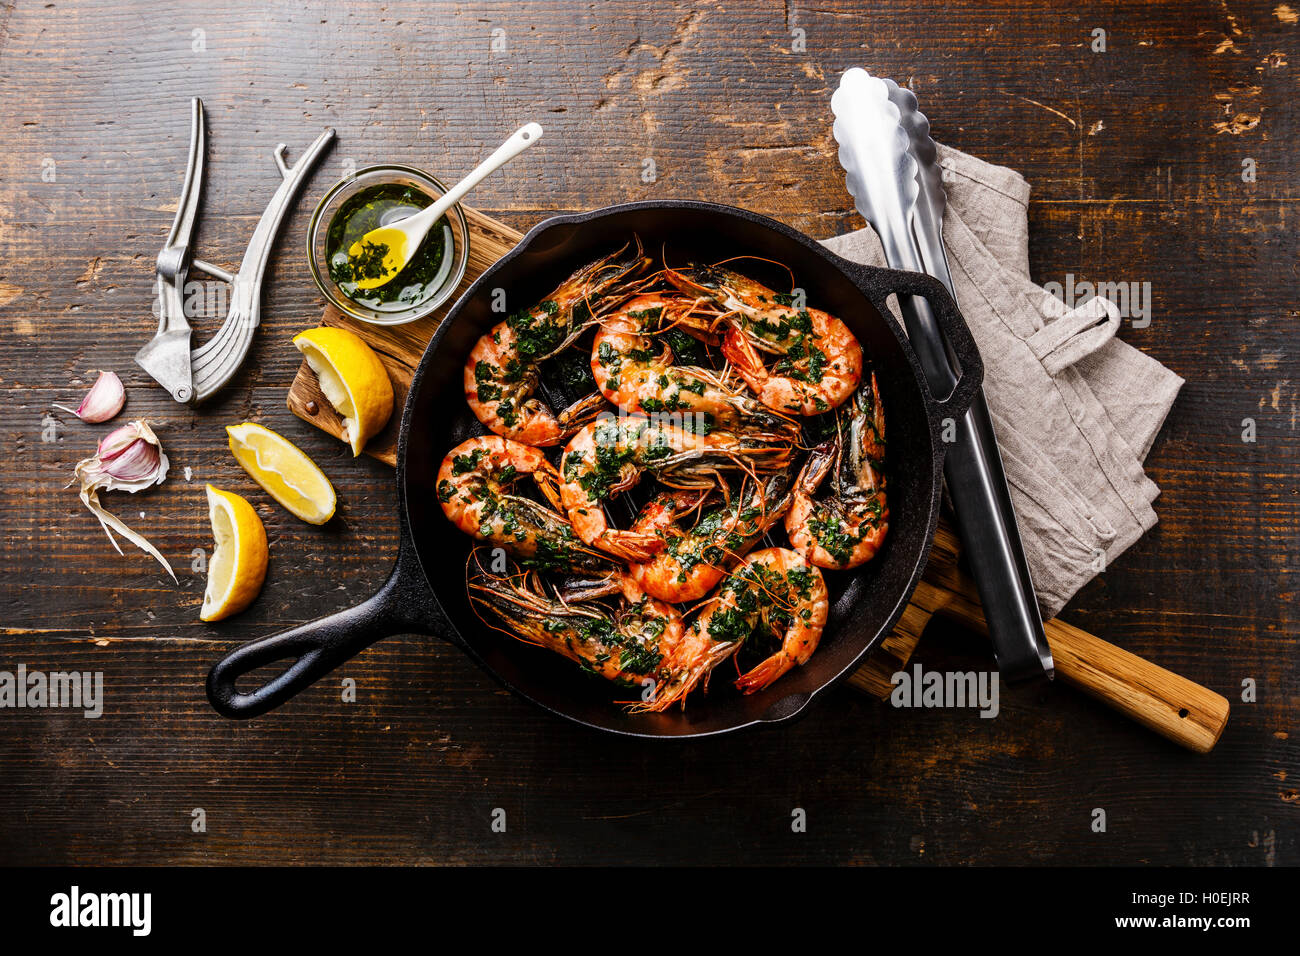 Tiger prawns shrimps roasted on frying grill pan with green sauce, lemon and garlic on wooden background Stock Photo